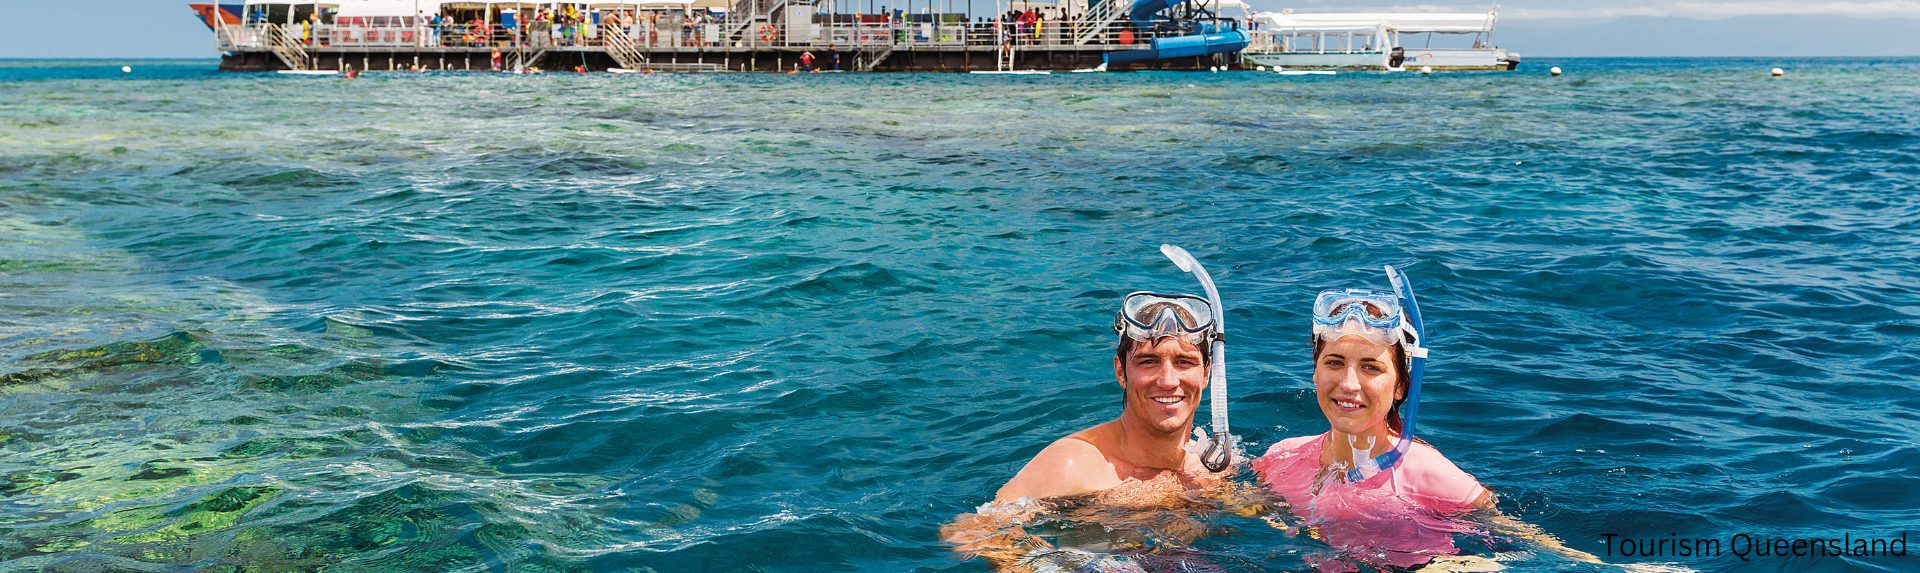 3 best tours for snorkelling the Great Barrier Reef